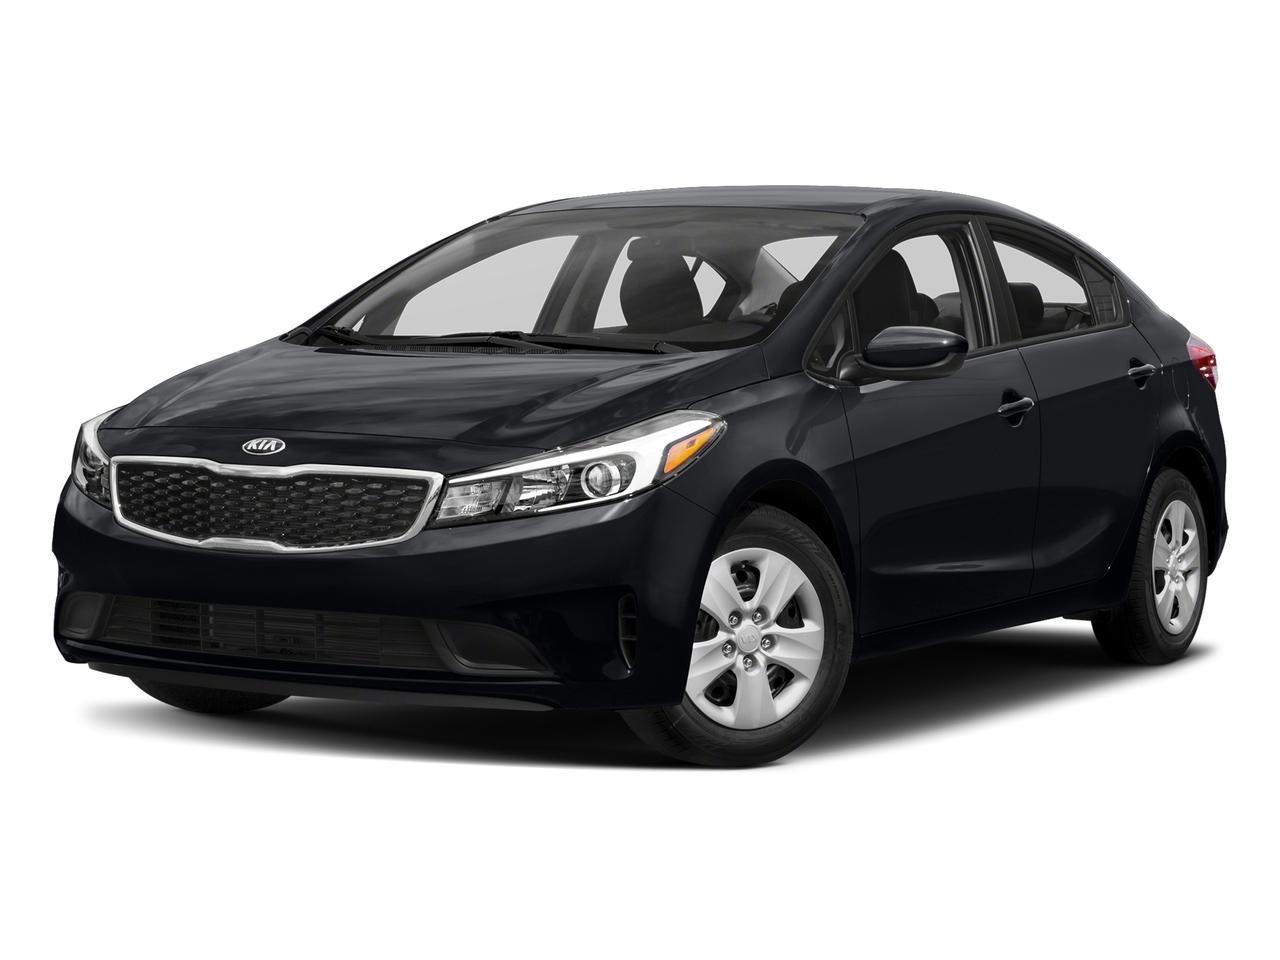 Used Aurora Black 2017 Kia Forte LX for sale at Ricart Used Car Factory ...